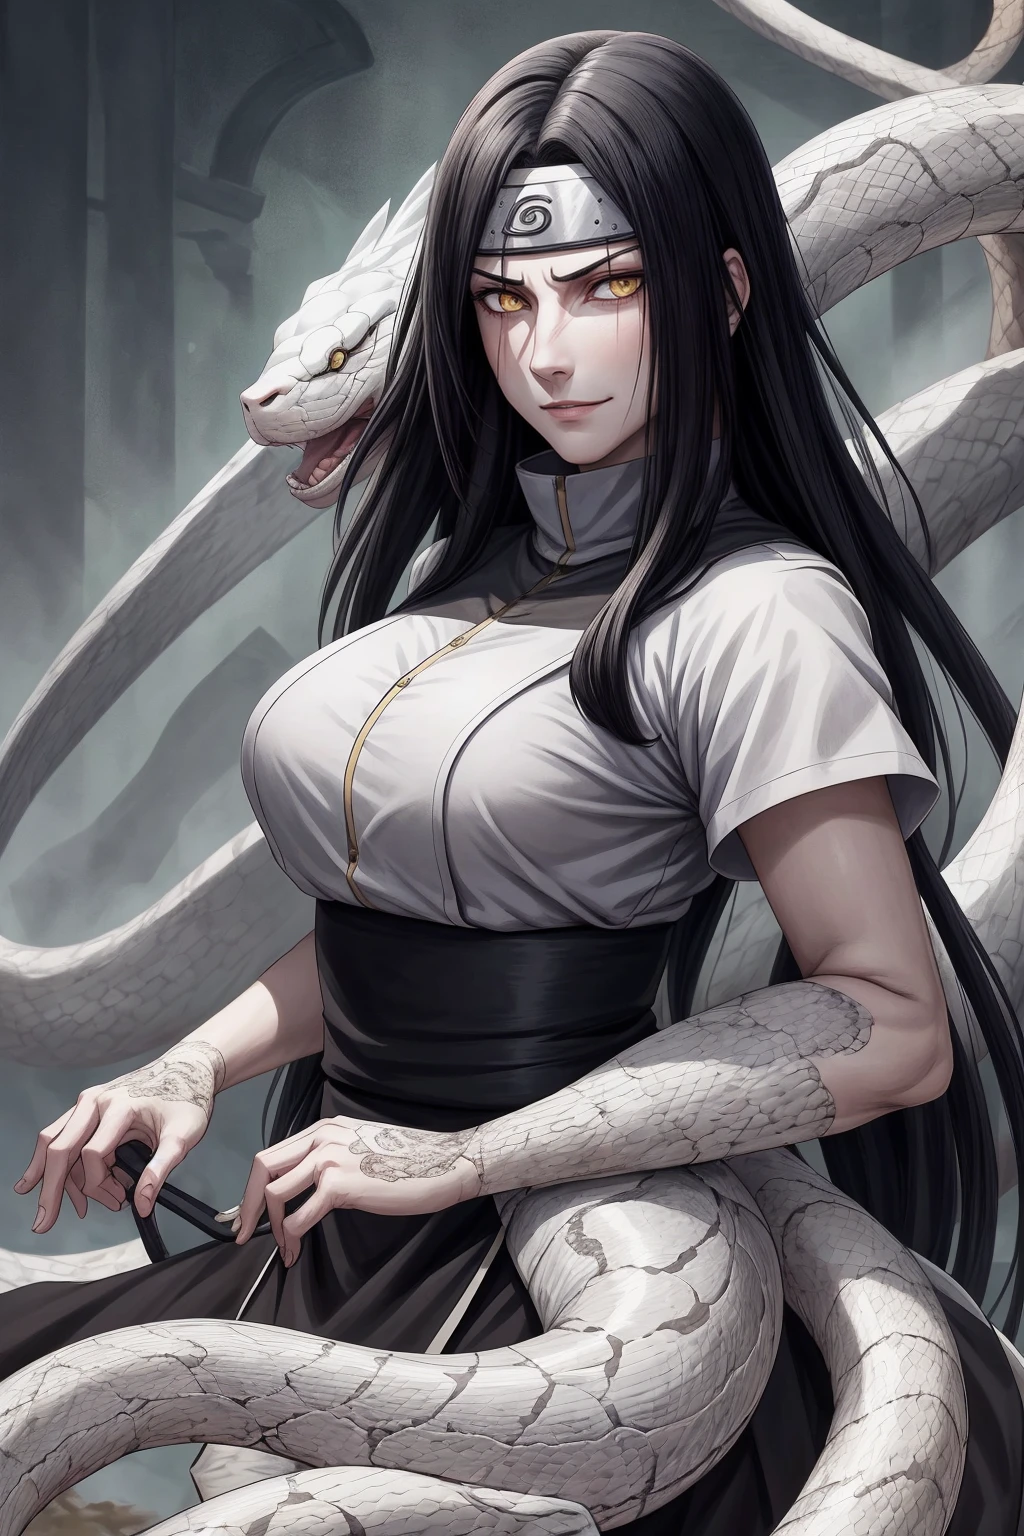 {-erro_de_anatomia:1.0} estilo anime, Masterpiece, absurdities, Orochimaru\(Naruto\), 1girl Solo, Mature woman, Oversized shirt with broad shoulders, Perfect composition, Detailed lips, large breasts, Beautiful face, body proportion, Blush, Long black hair, ( black hair), yellow eyes, Soft gauze, Super realistic, Detailed, photo shoot, Realistic faces and bodies, masterpiece, best quality, best ( white snake) illustration, hyper detailed, 1 girl, solo, glamorous, blushing, upper body, backwards, looking back